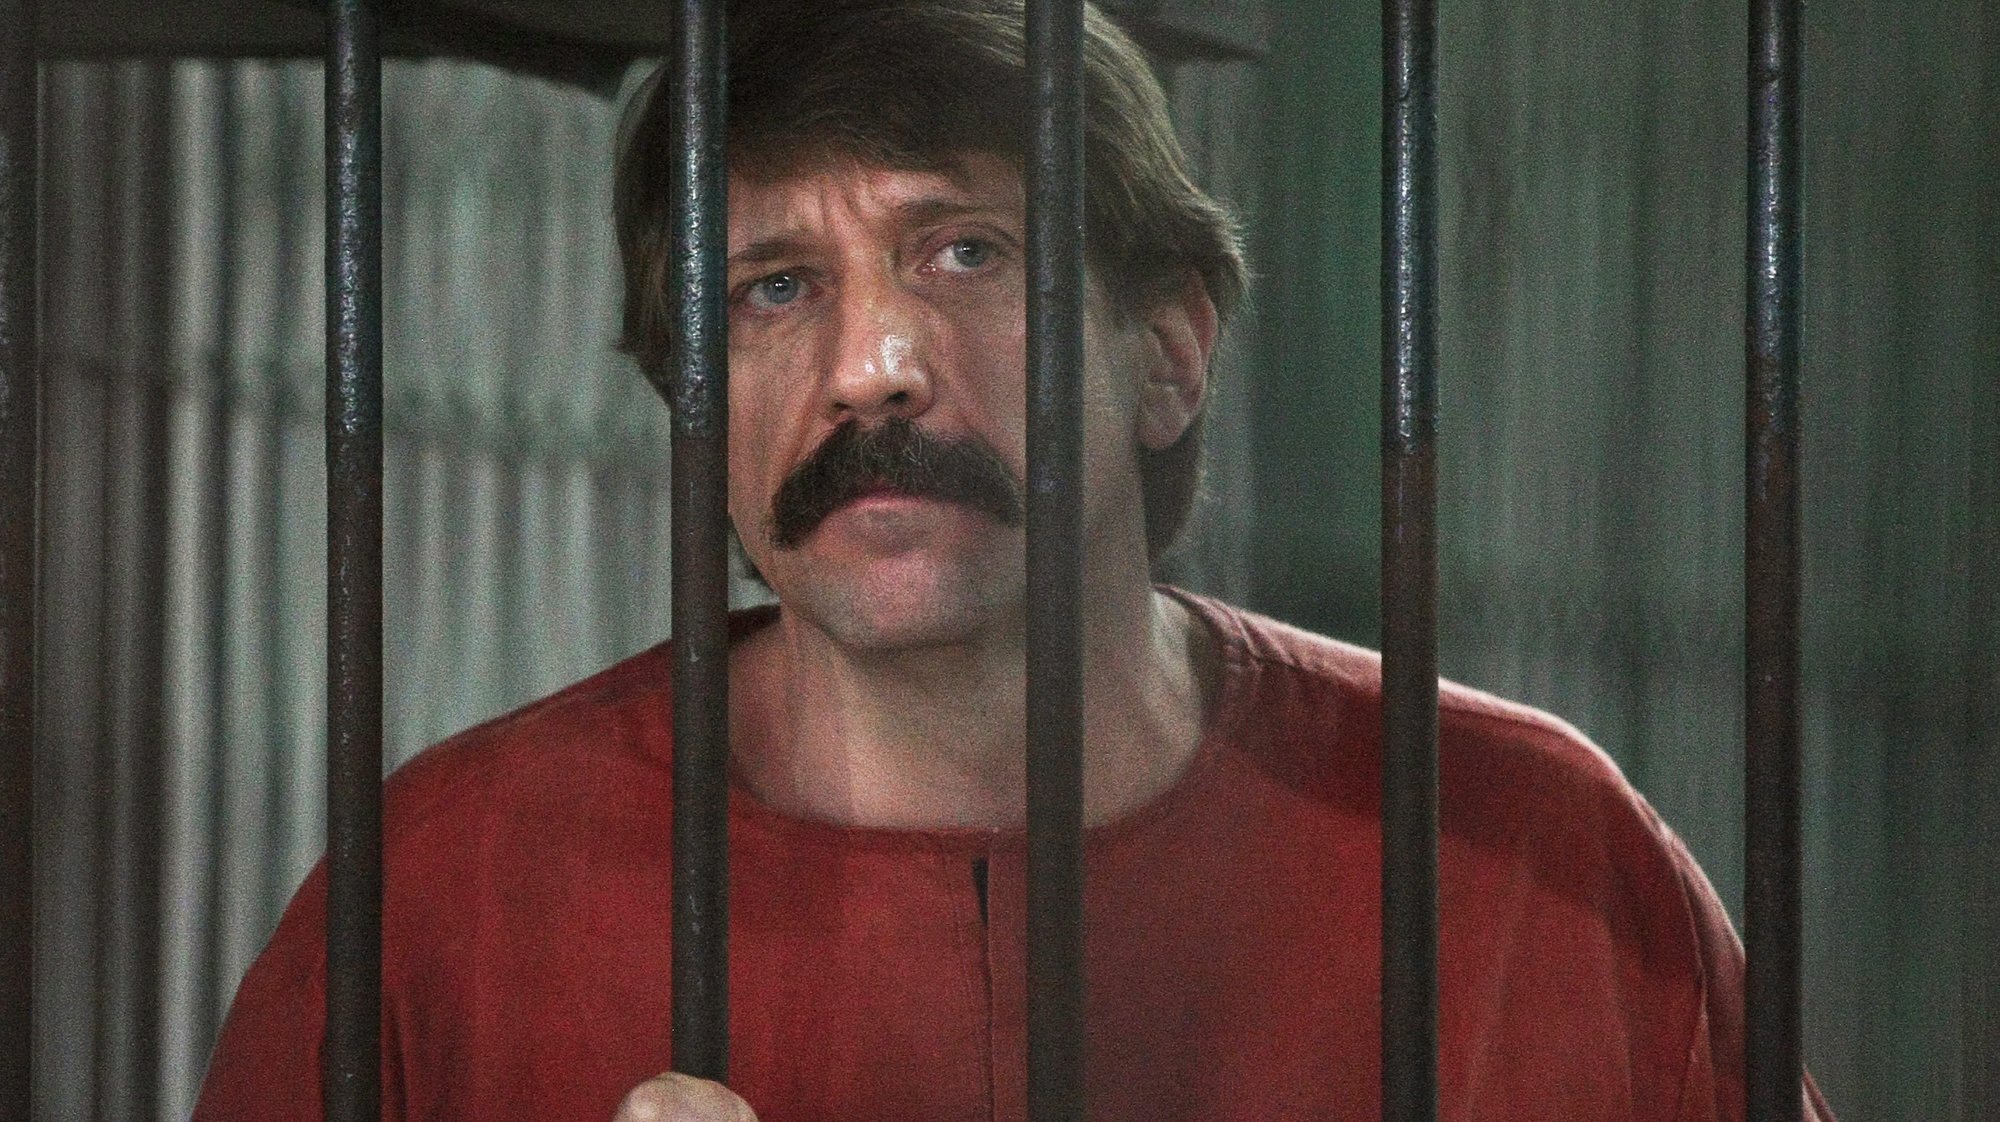 epa02990321 (FILES) File picture dated  04 October 2010 of then alleged Russian arms dealer Viktor Bout inside a cell at the criminal court in Bangkok, Thailand. The former Soviet military officer has been found guilty in a New York court of attempting to sell heavy weapons to a Colombian terror group. Prosecutors said Viktor Bout stood to make millions from supplying weapons to the Revolutionary Armed Forces of Colombia (Farc).  EPA/NARONG SANGNAK